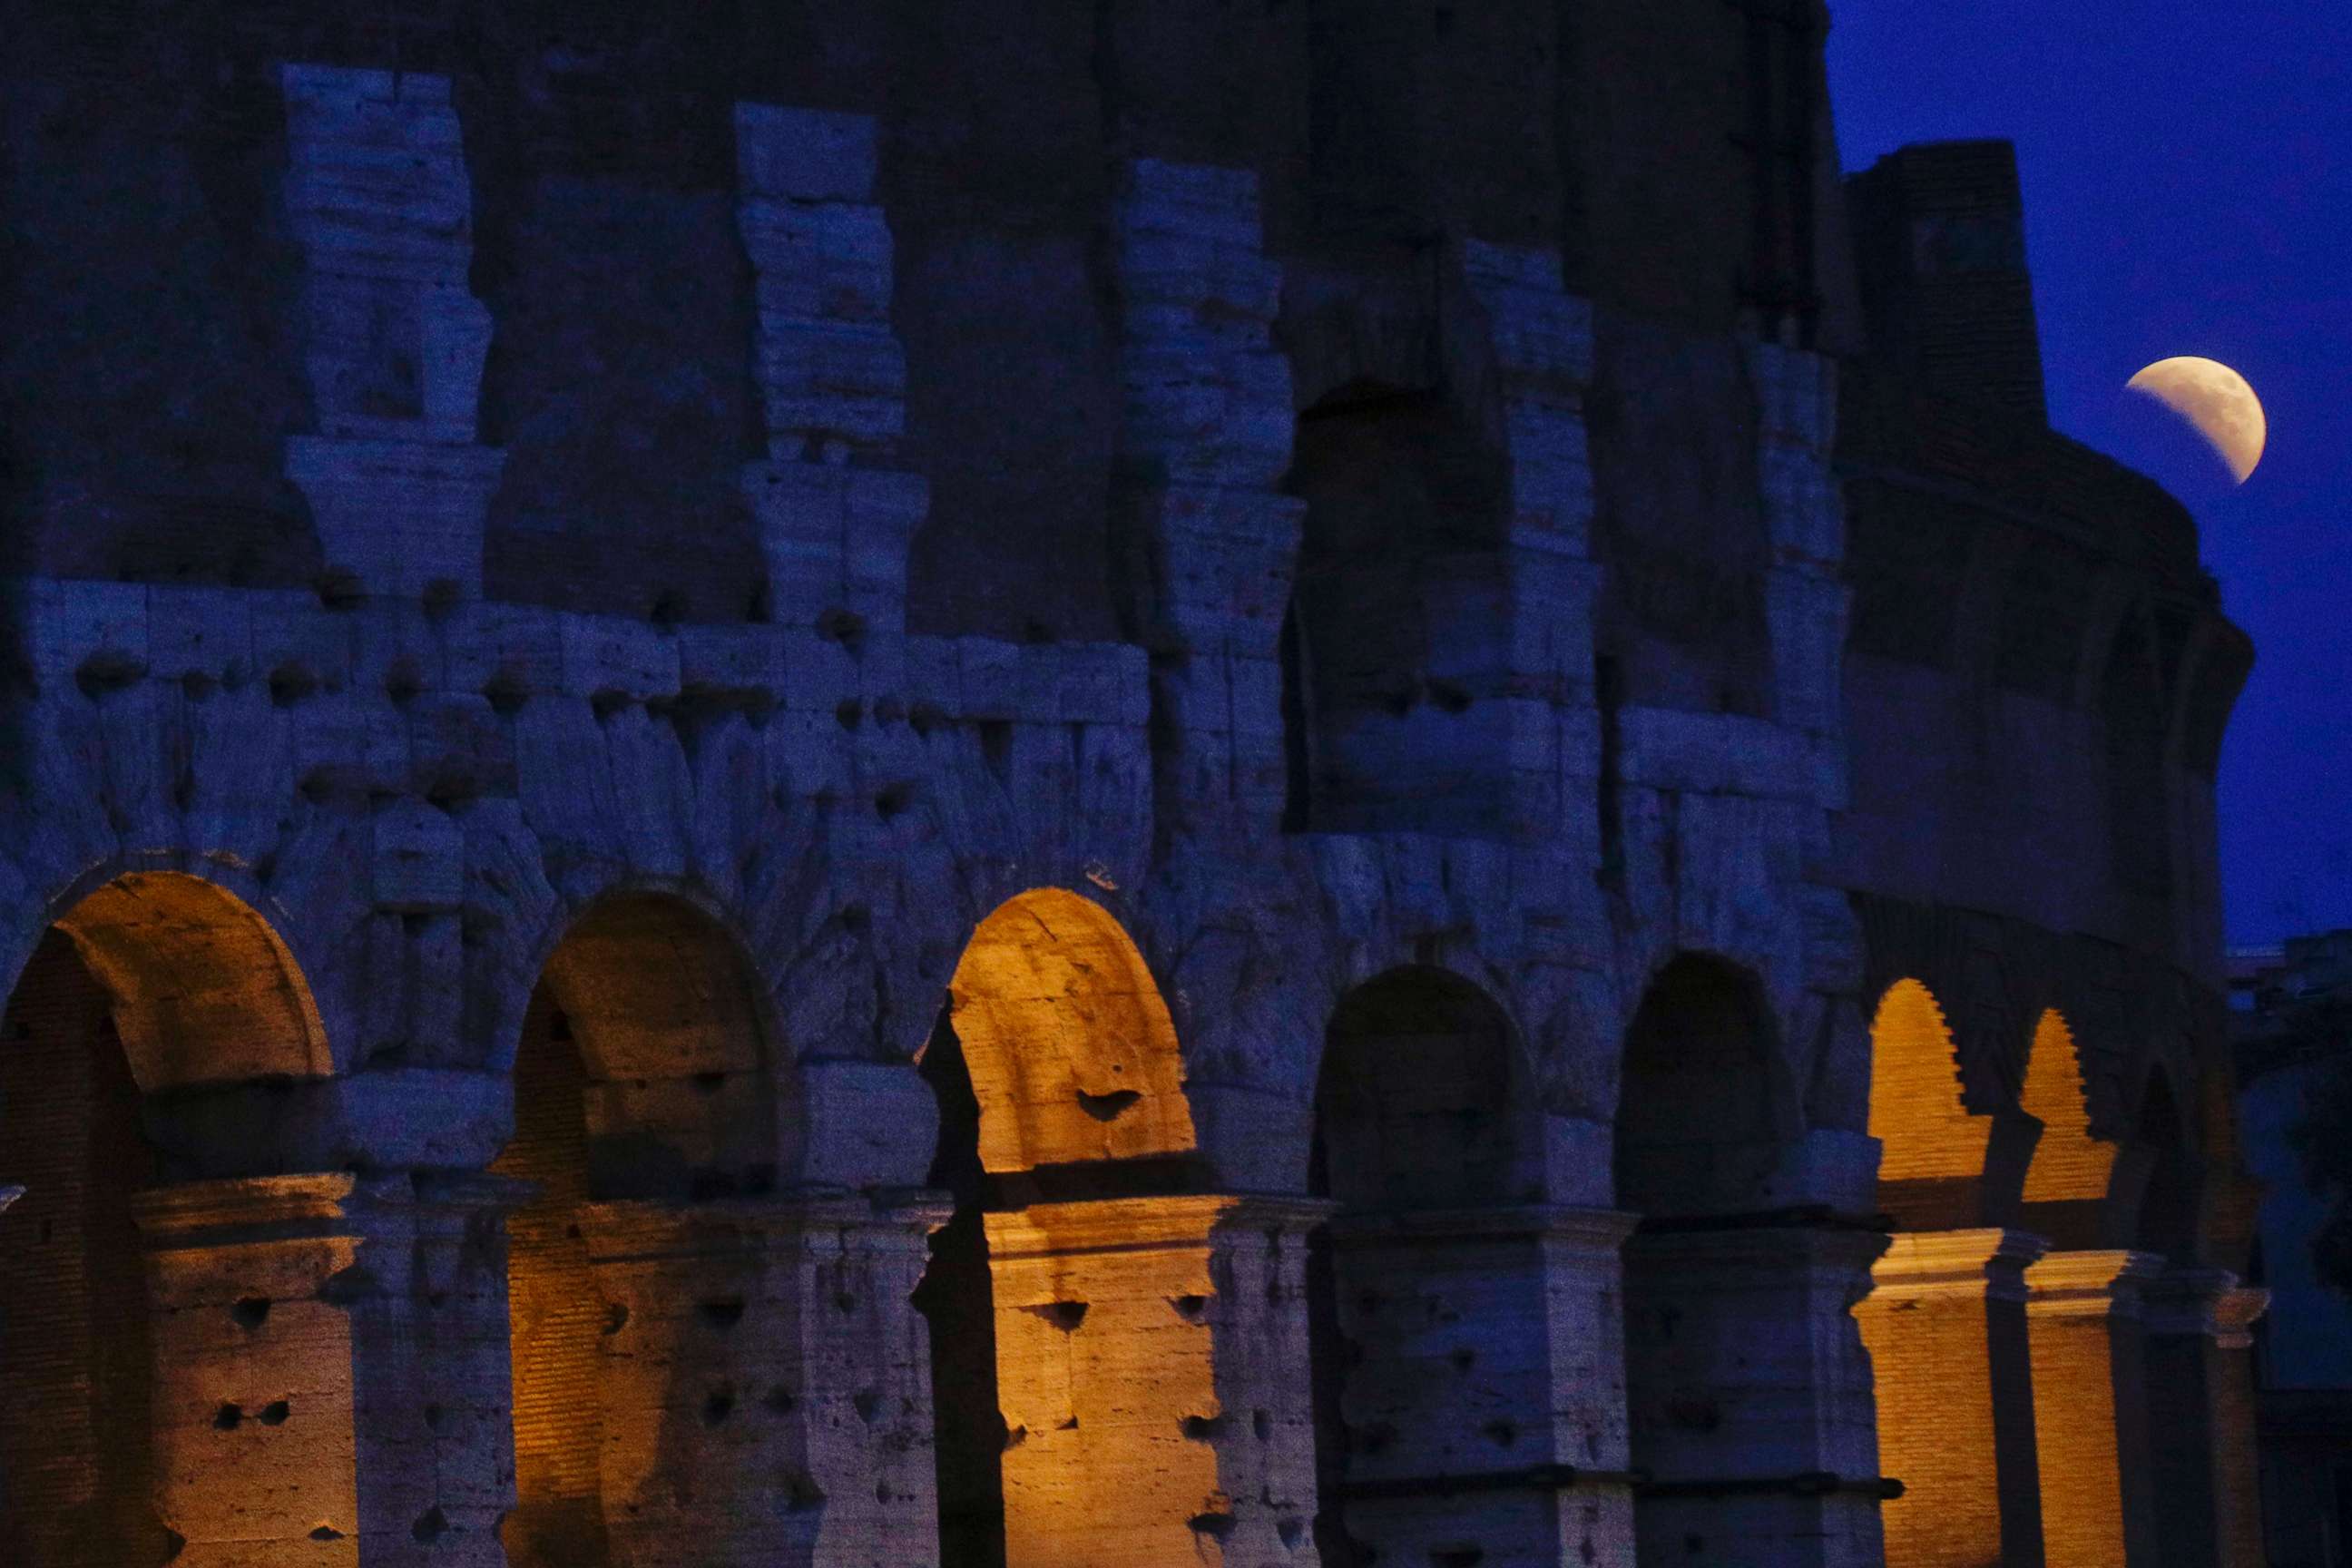 PHOTO: The moon rises over the Colosseum during a complete lunar eclipse, in Rome, July 27, 2018.